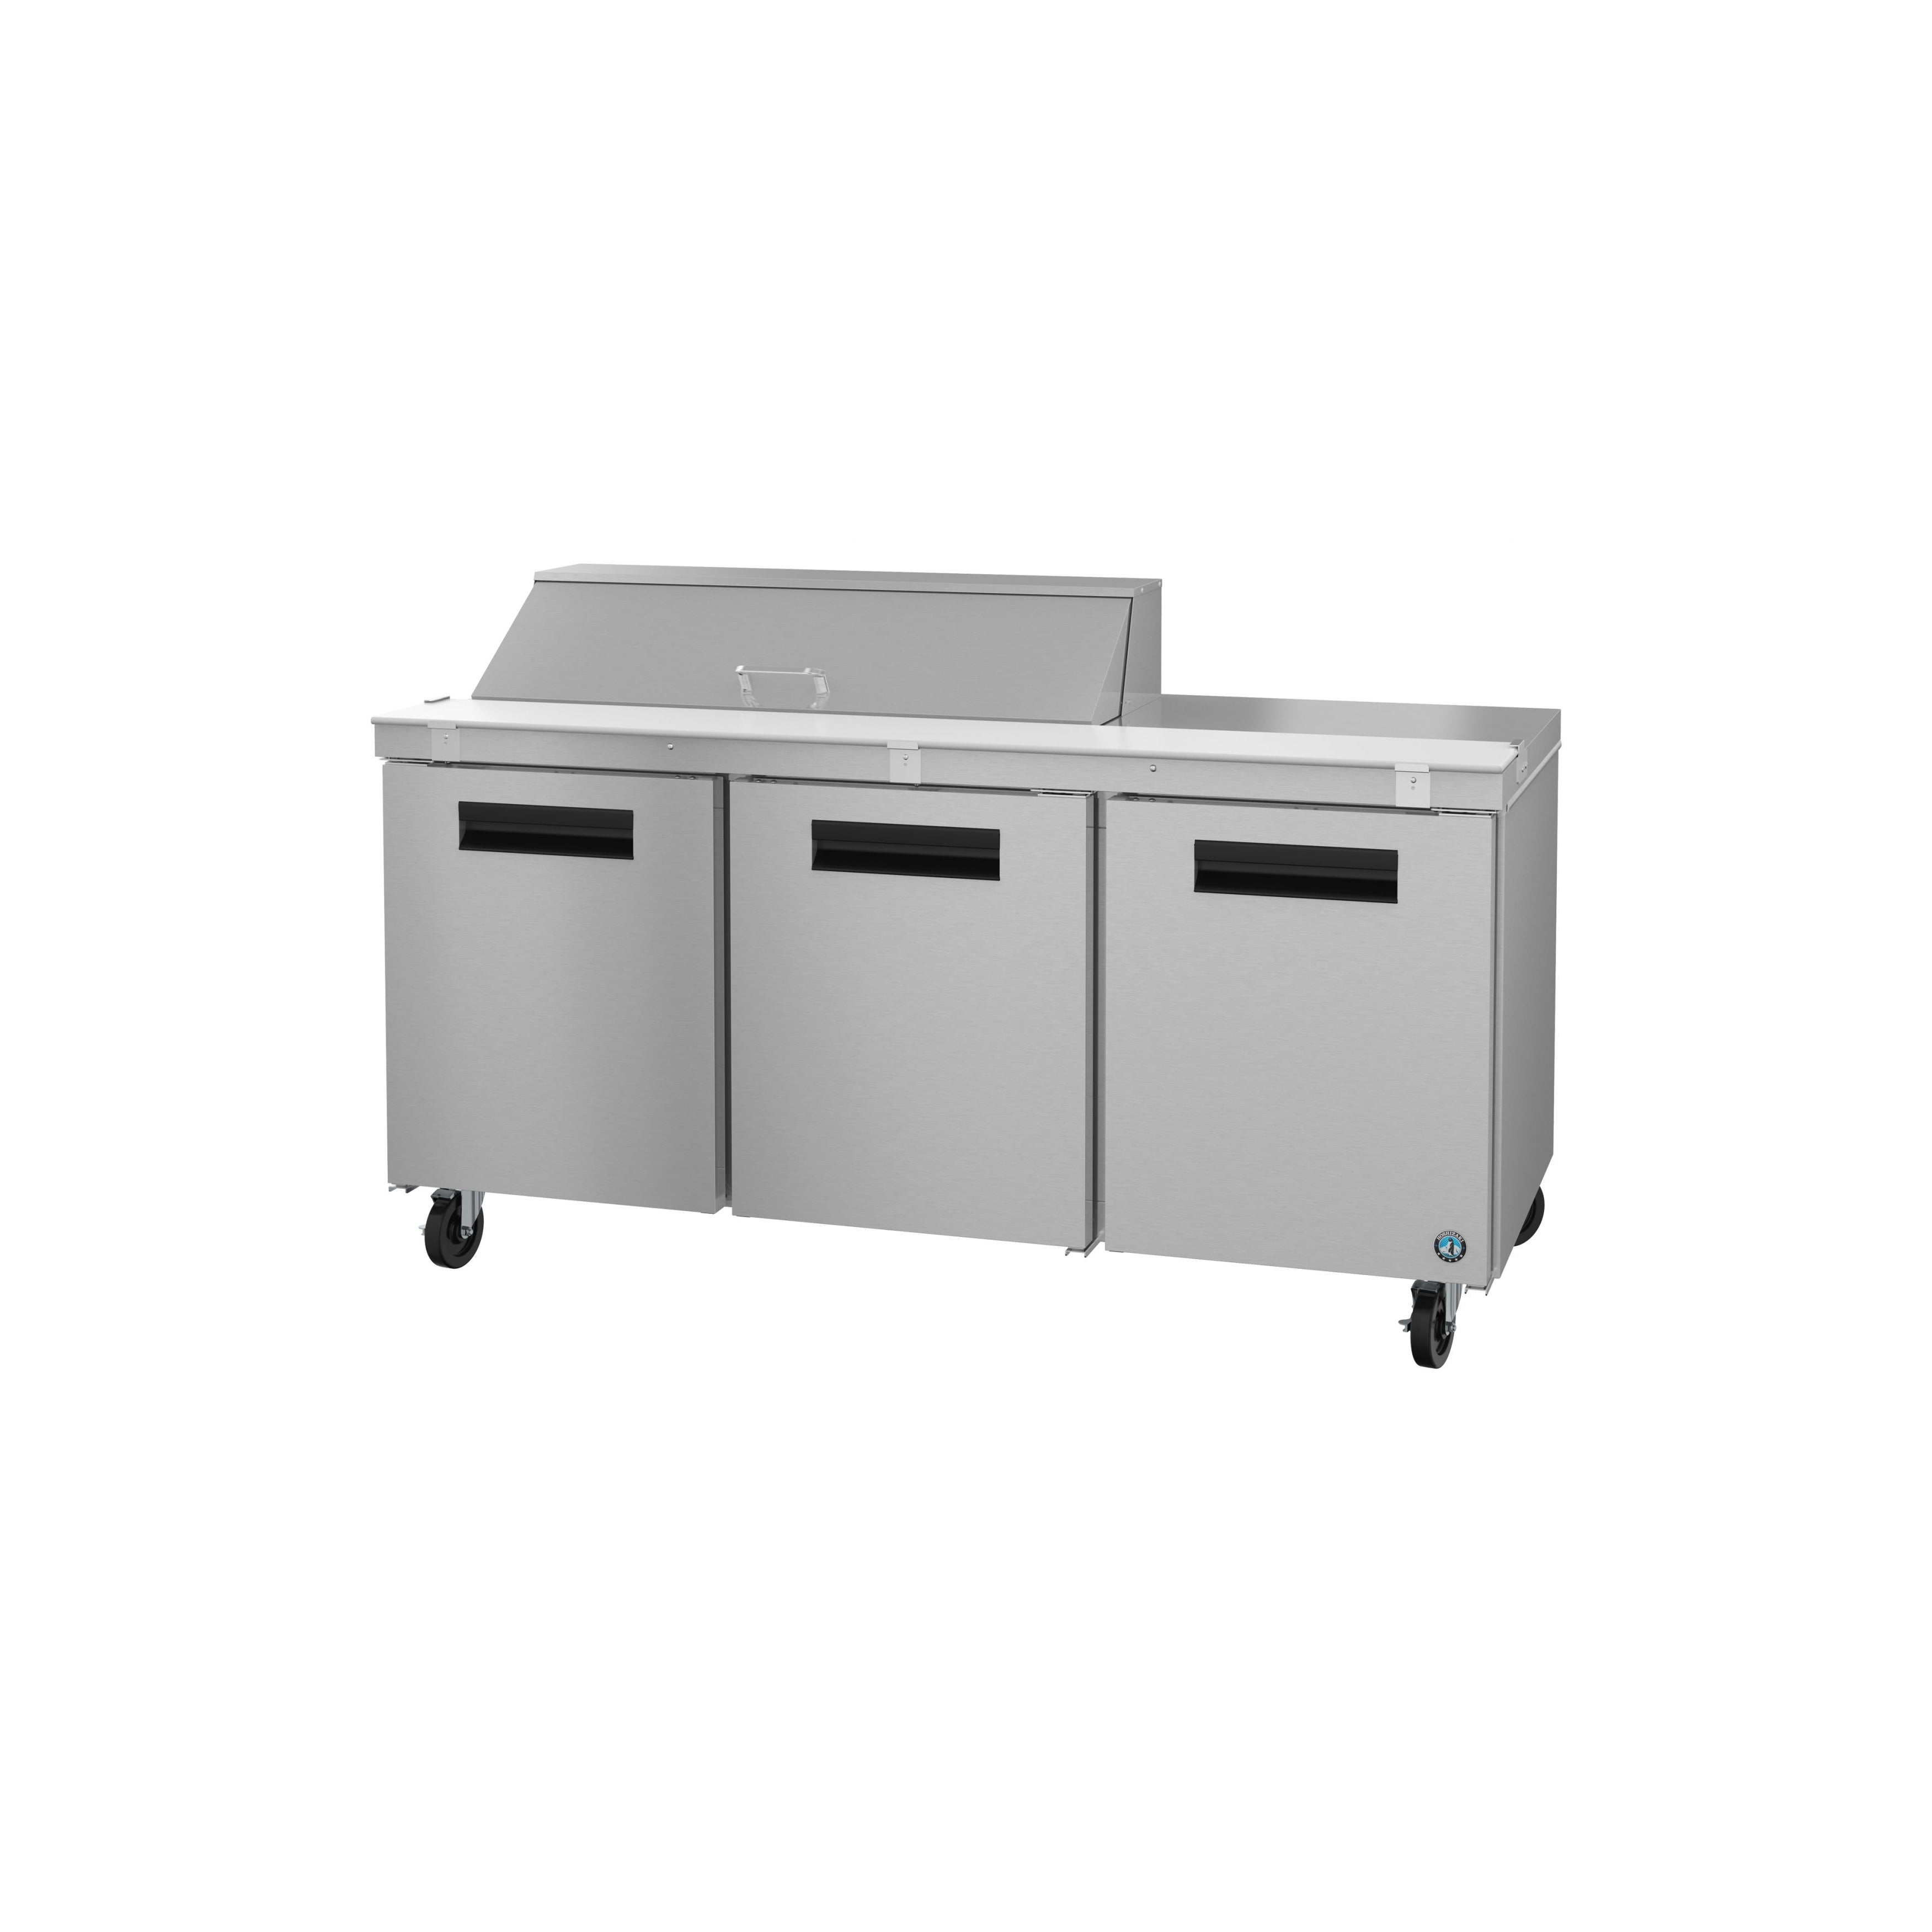 Hoshizaki - SR72B-12, Commercial 72" Three Section Sandwich Prep Table Refrigerator Stainless Doors 18cu.ft.